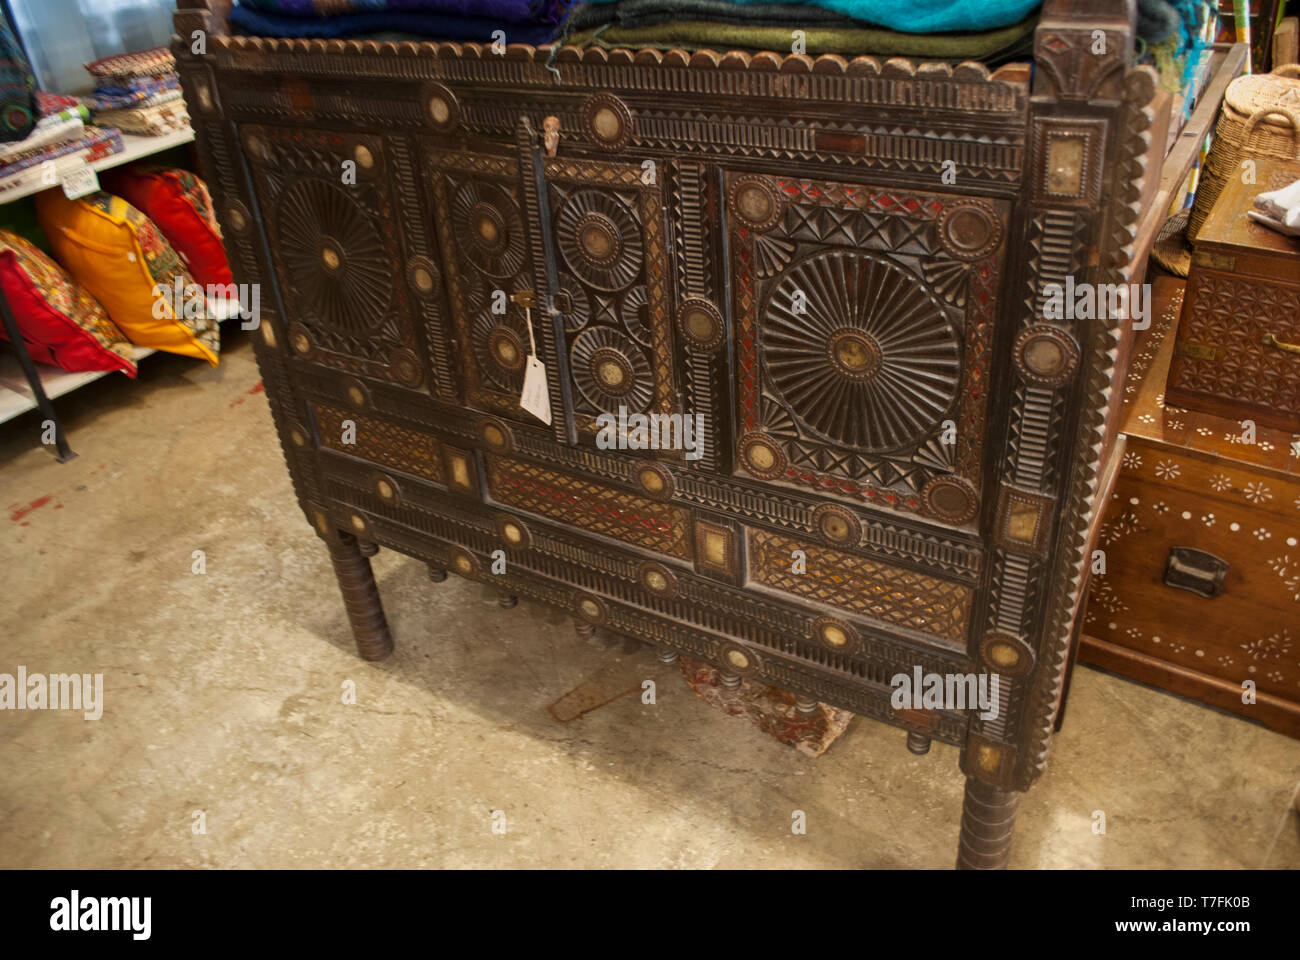 Antique furniture. Retro interior. Home design eastern style.Handmade traditional wooden furniture Stock Photo